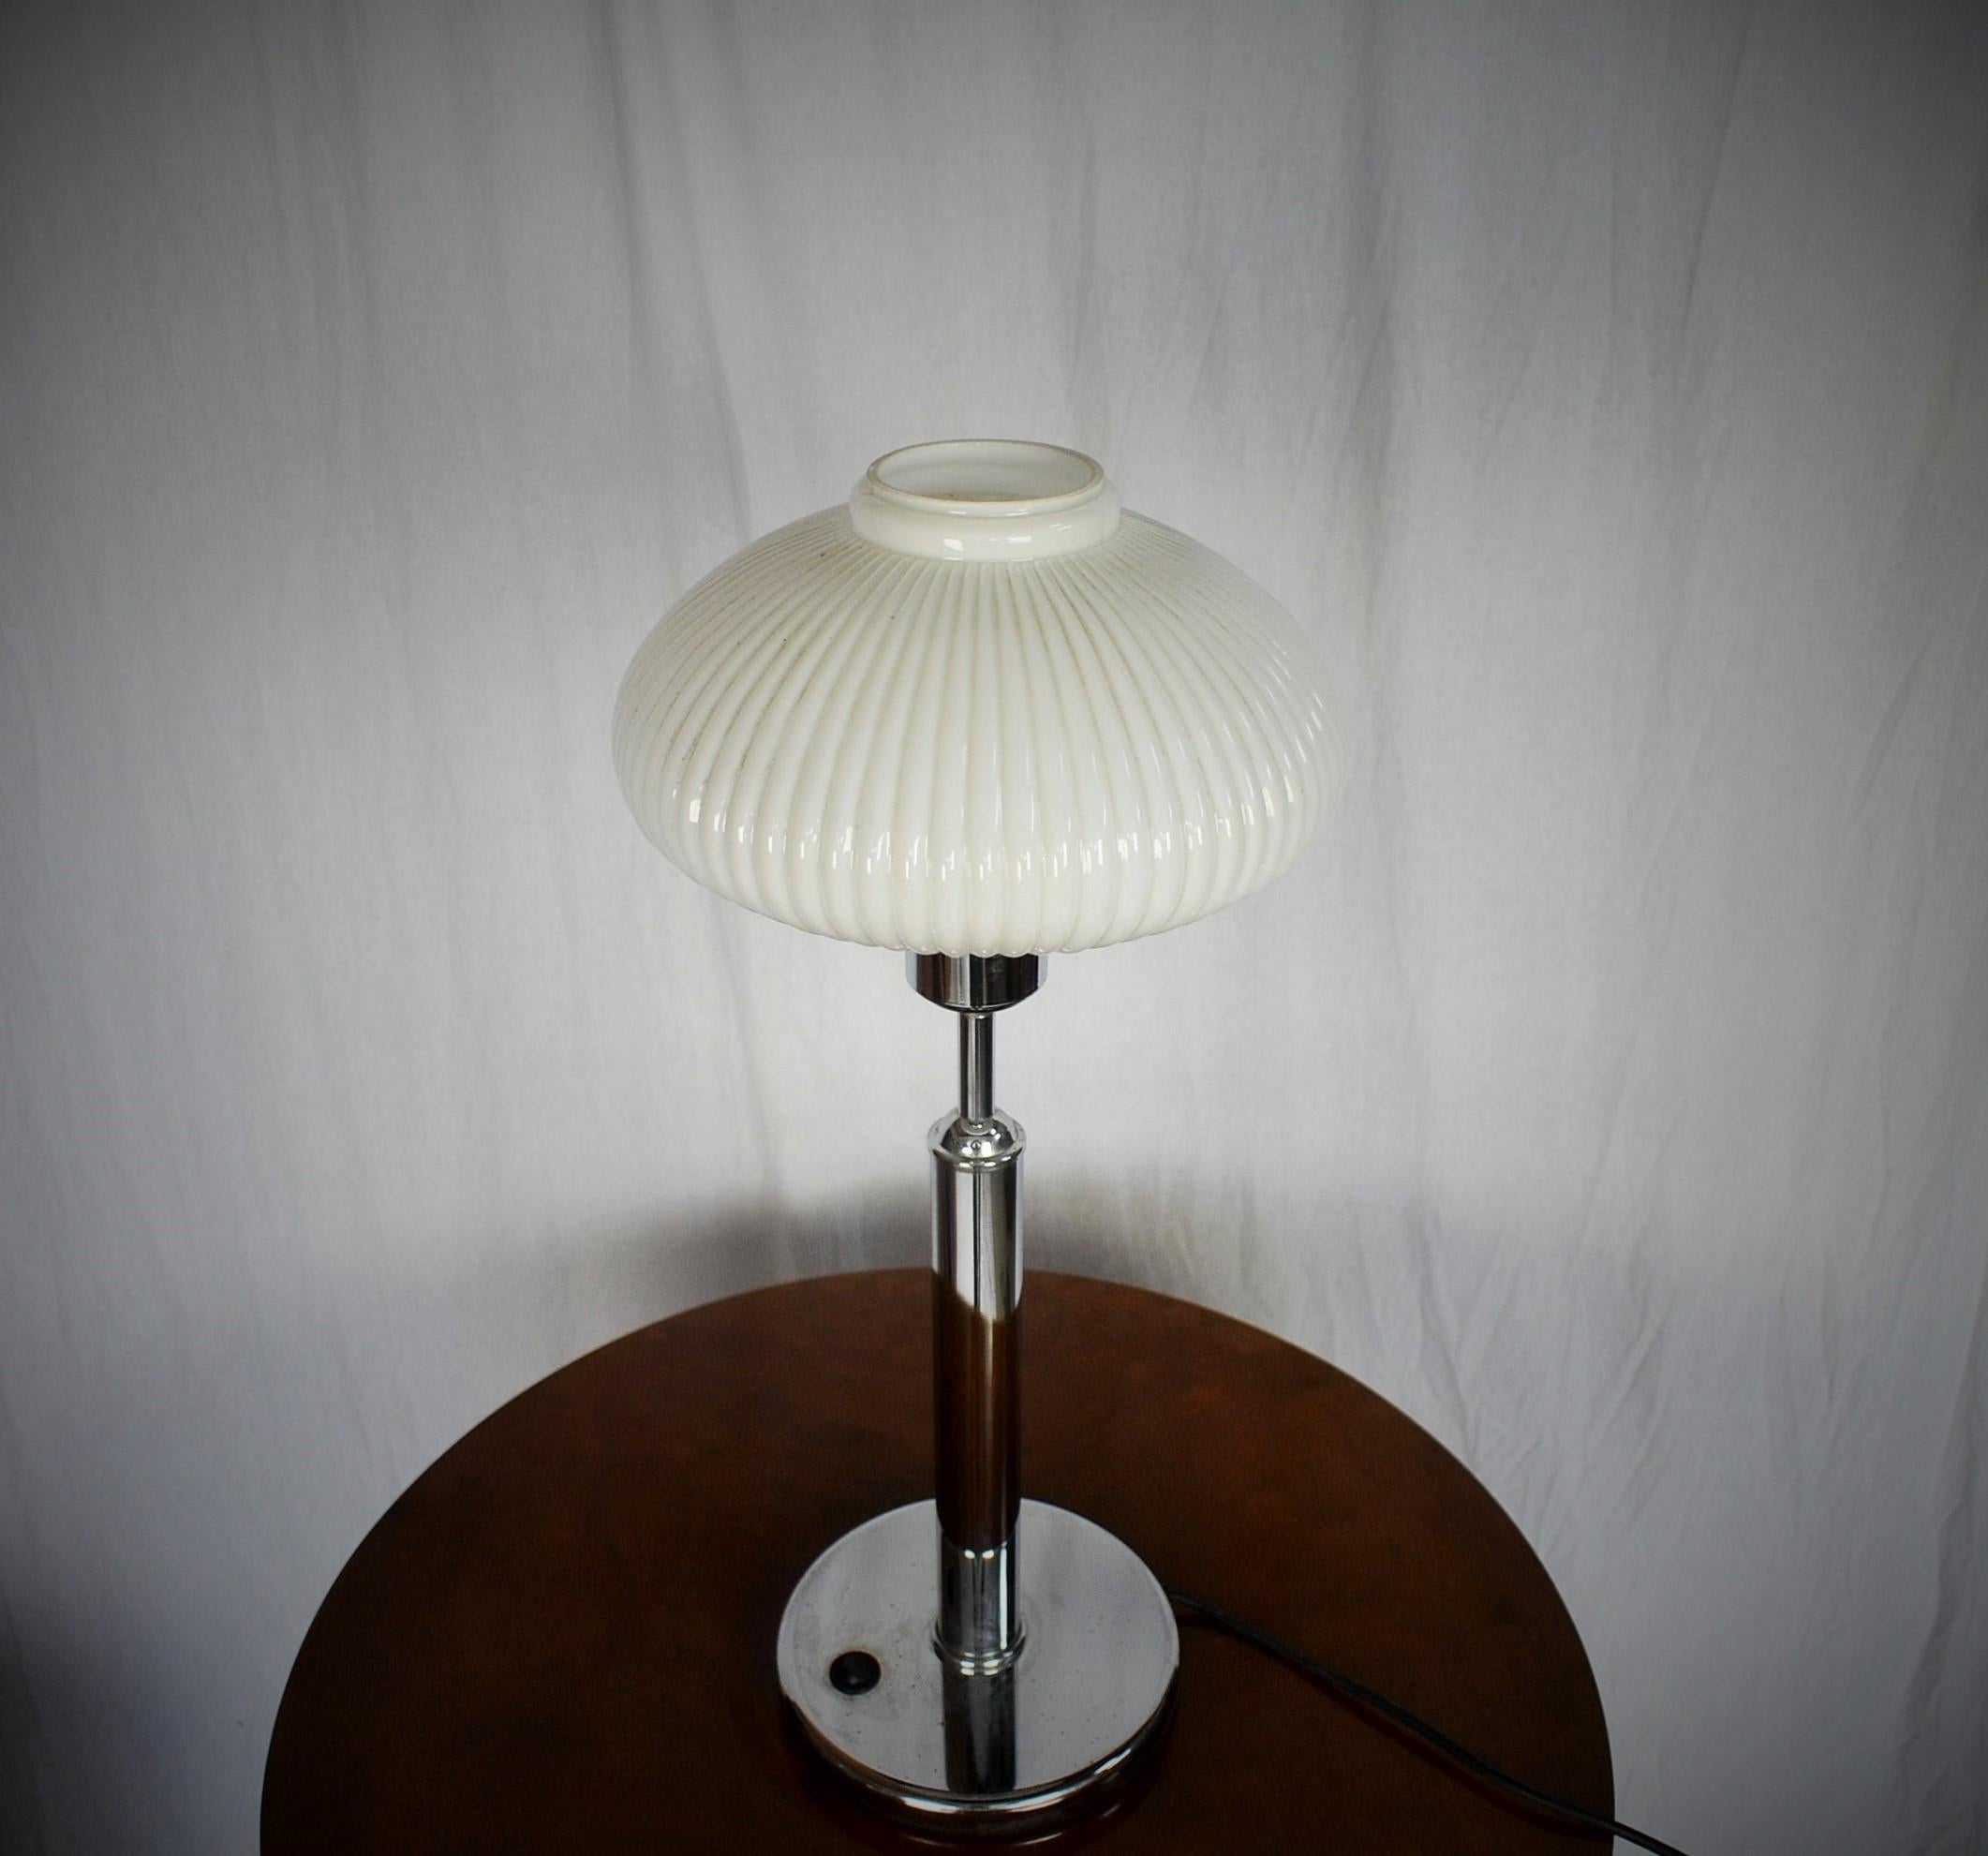 Glass Art Deco or Functionalist Nickel-Plated Table Lamp, 1920s For Sale